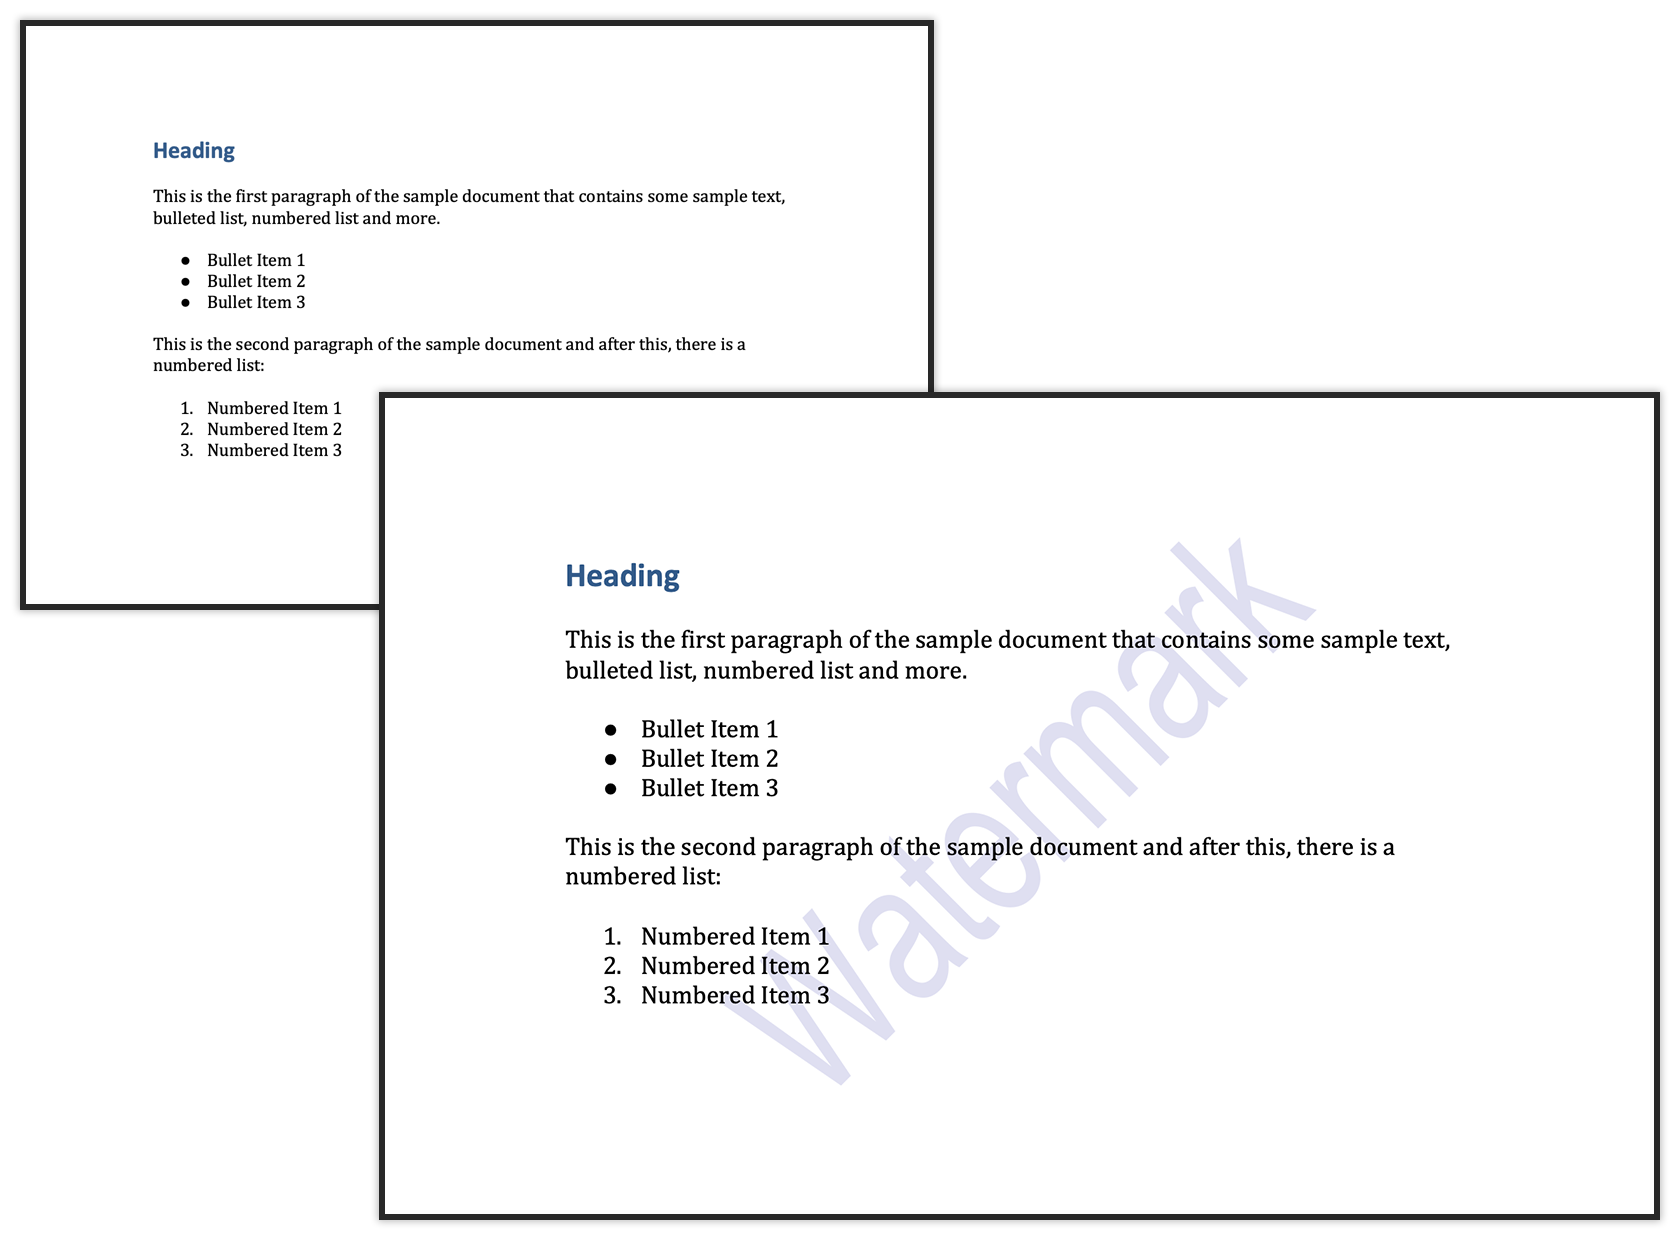 Example of Text Watermark in Word Document